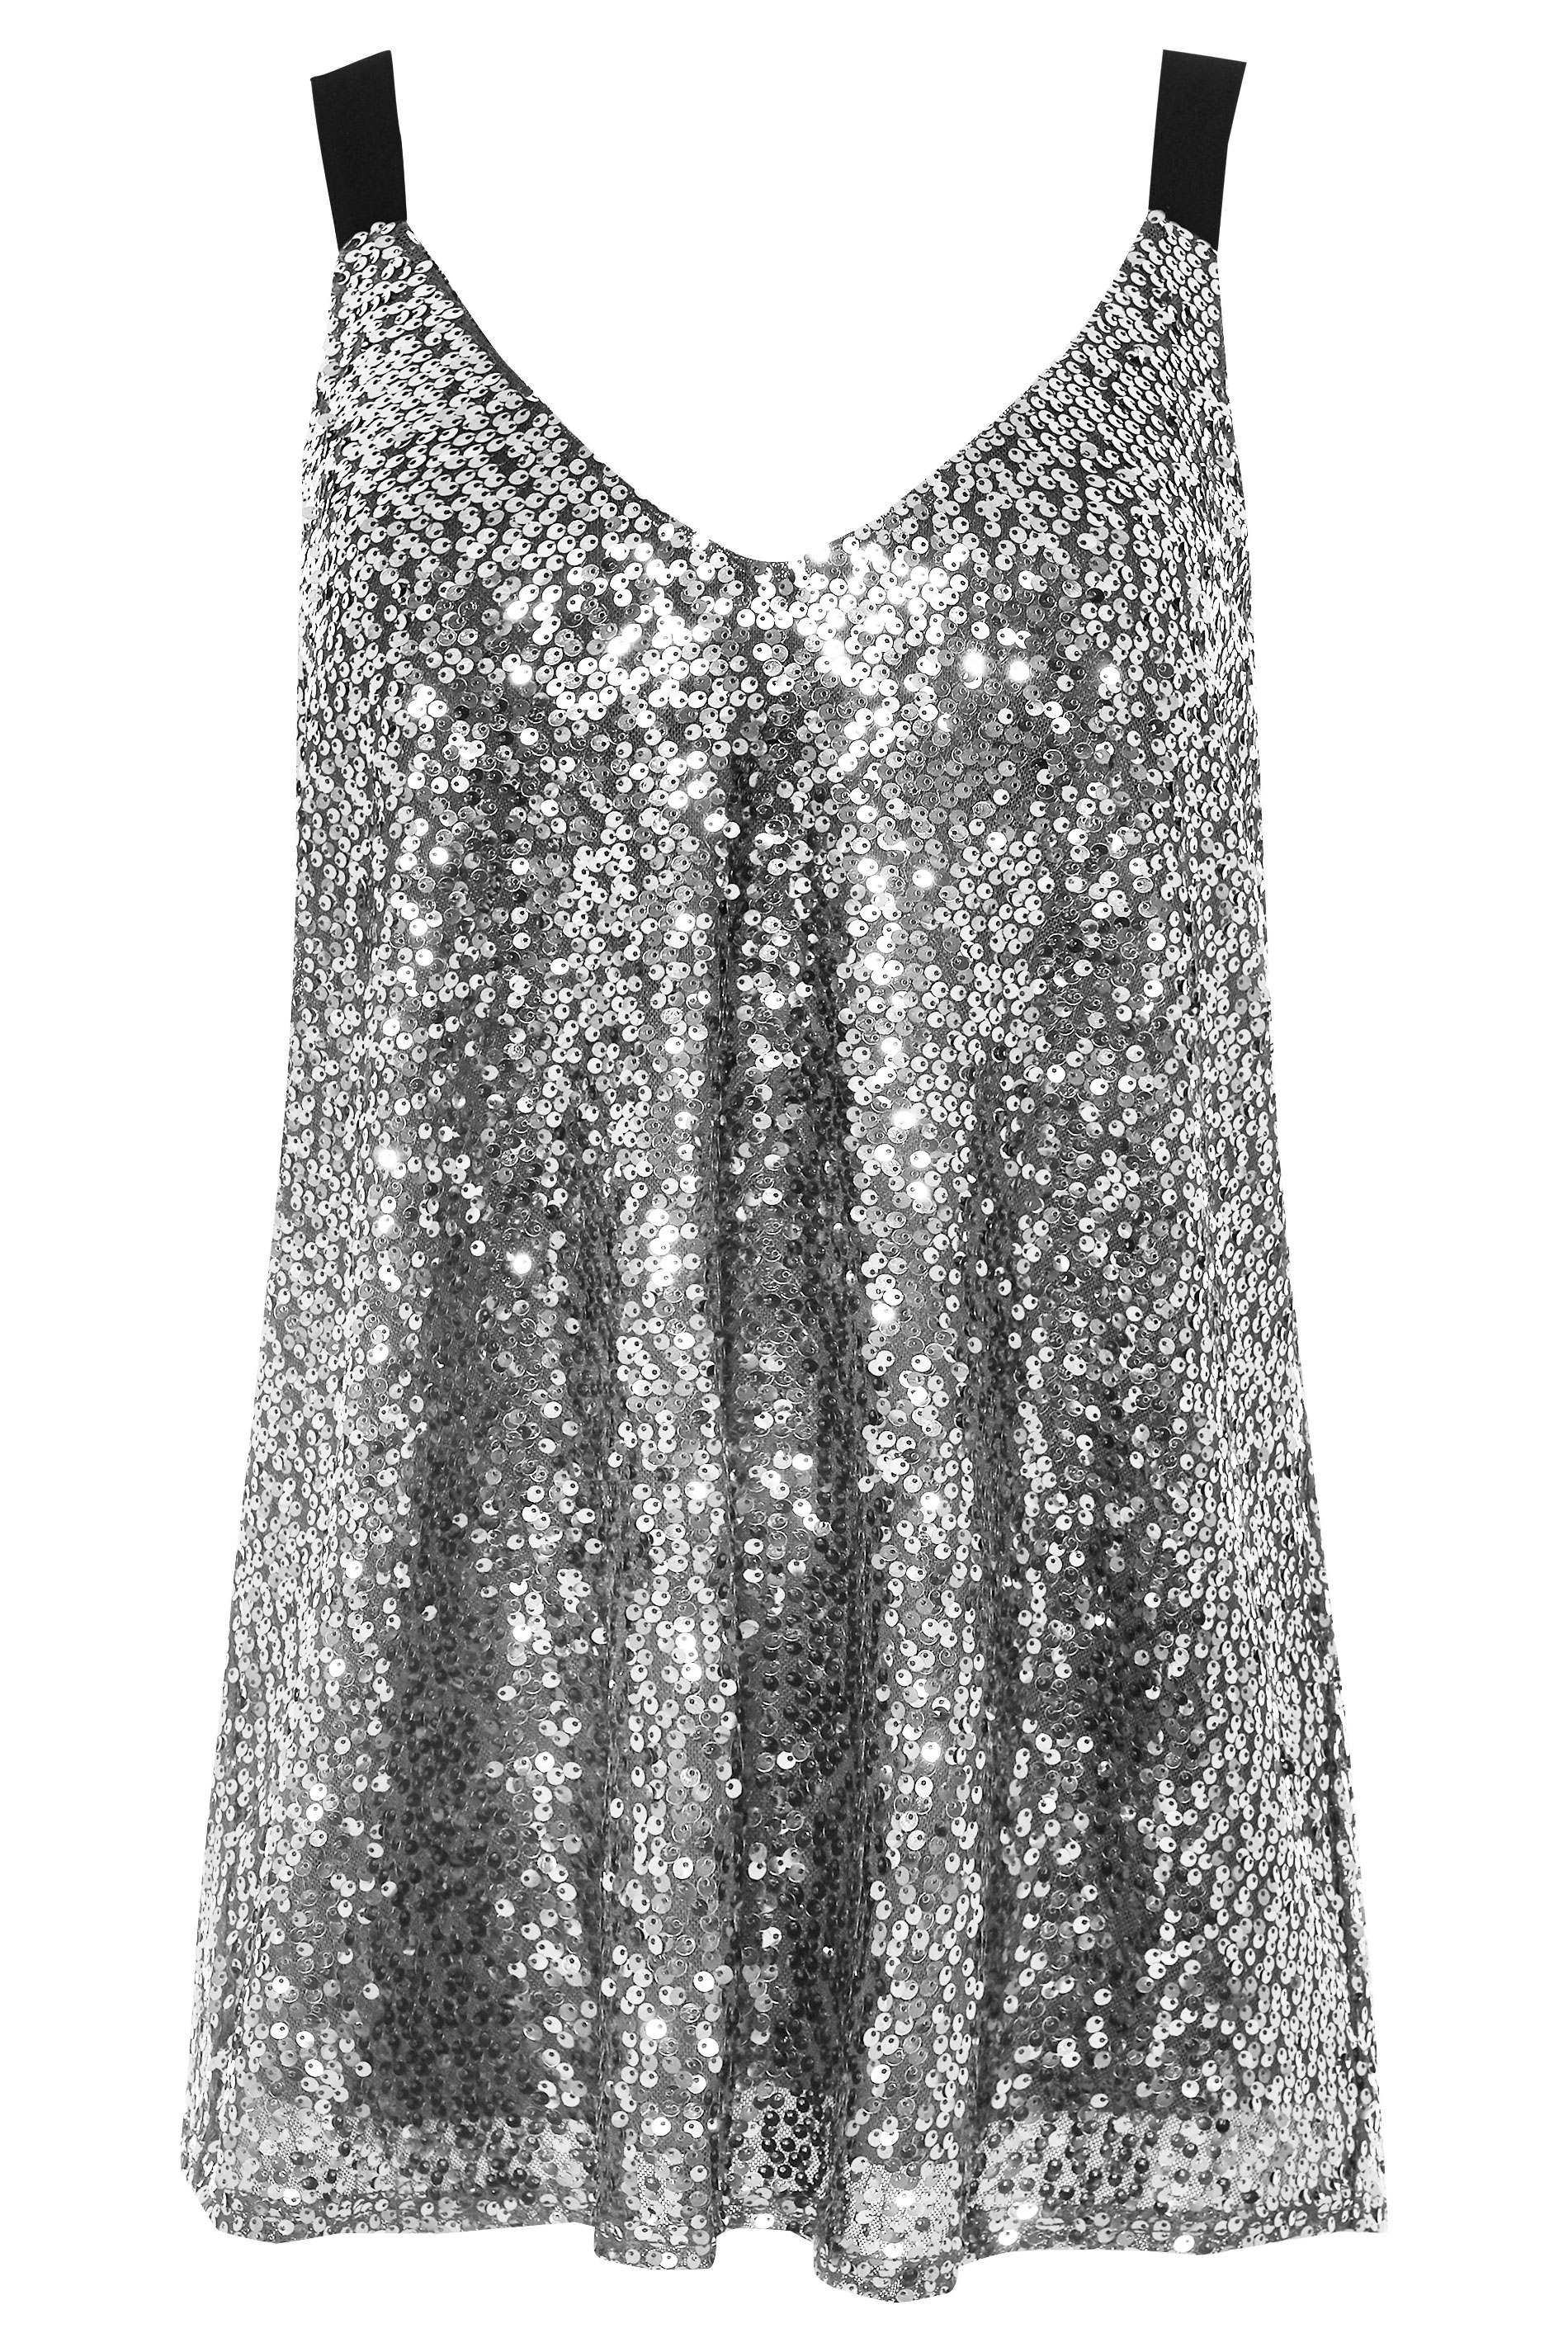 LTS Silver Sequin Cami Top | Long Tall Sally